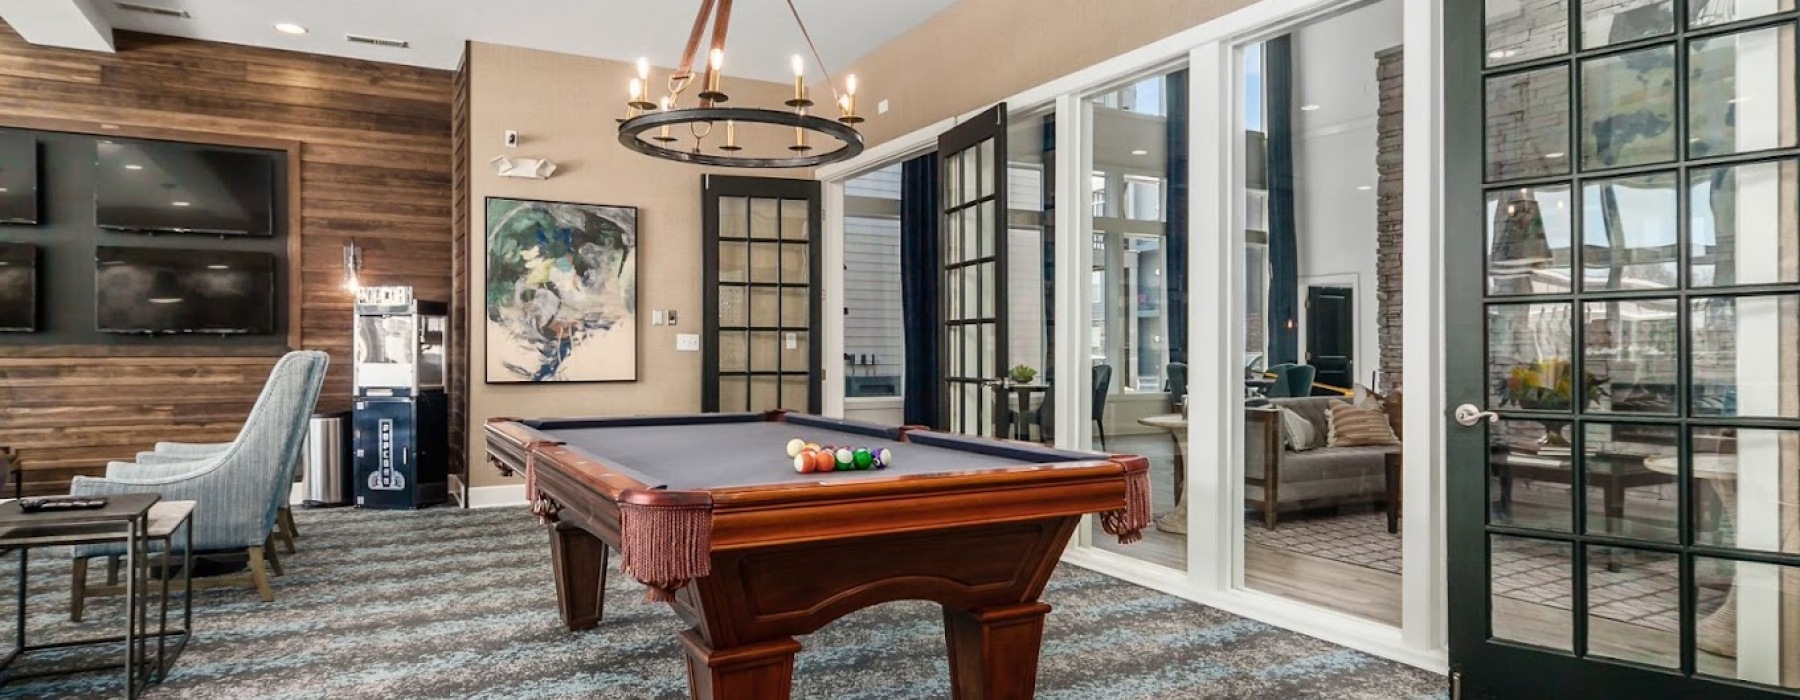 Apartment clubhouse with pool table